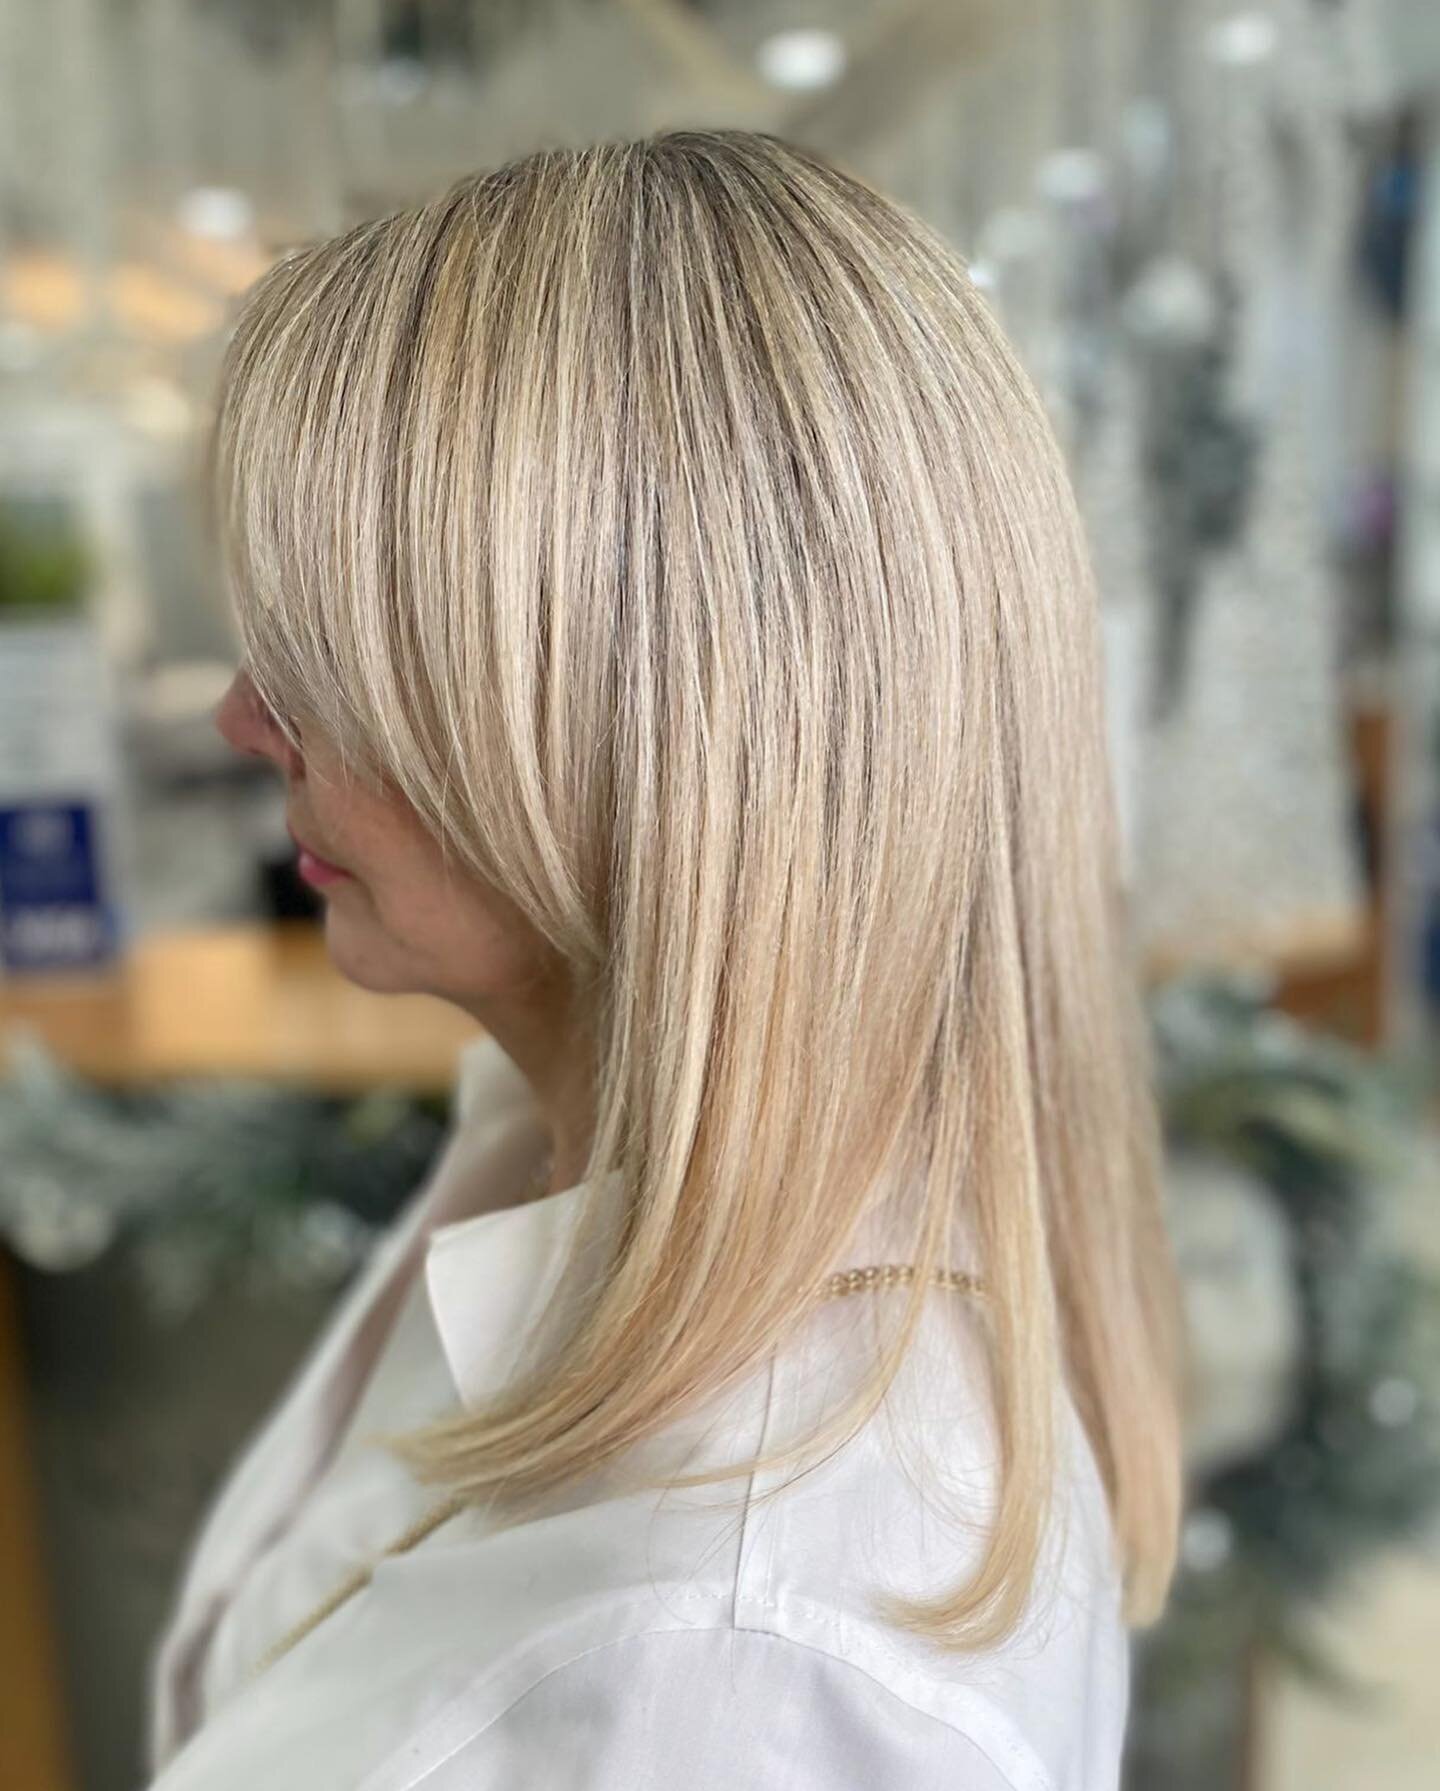 Beautiful color &amp; style.&rdquo;💫💫💫💫💫 hair done by: Oksana #blondbalayage #babylights #highlights #babylights #longhair #blondehair #goldblonde #balayage #ombrehair #brownhair #fadecolors #waveshair #blondhair #gold #wormblonde #shine #blondh